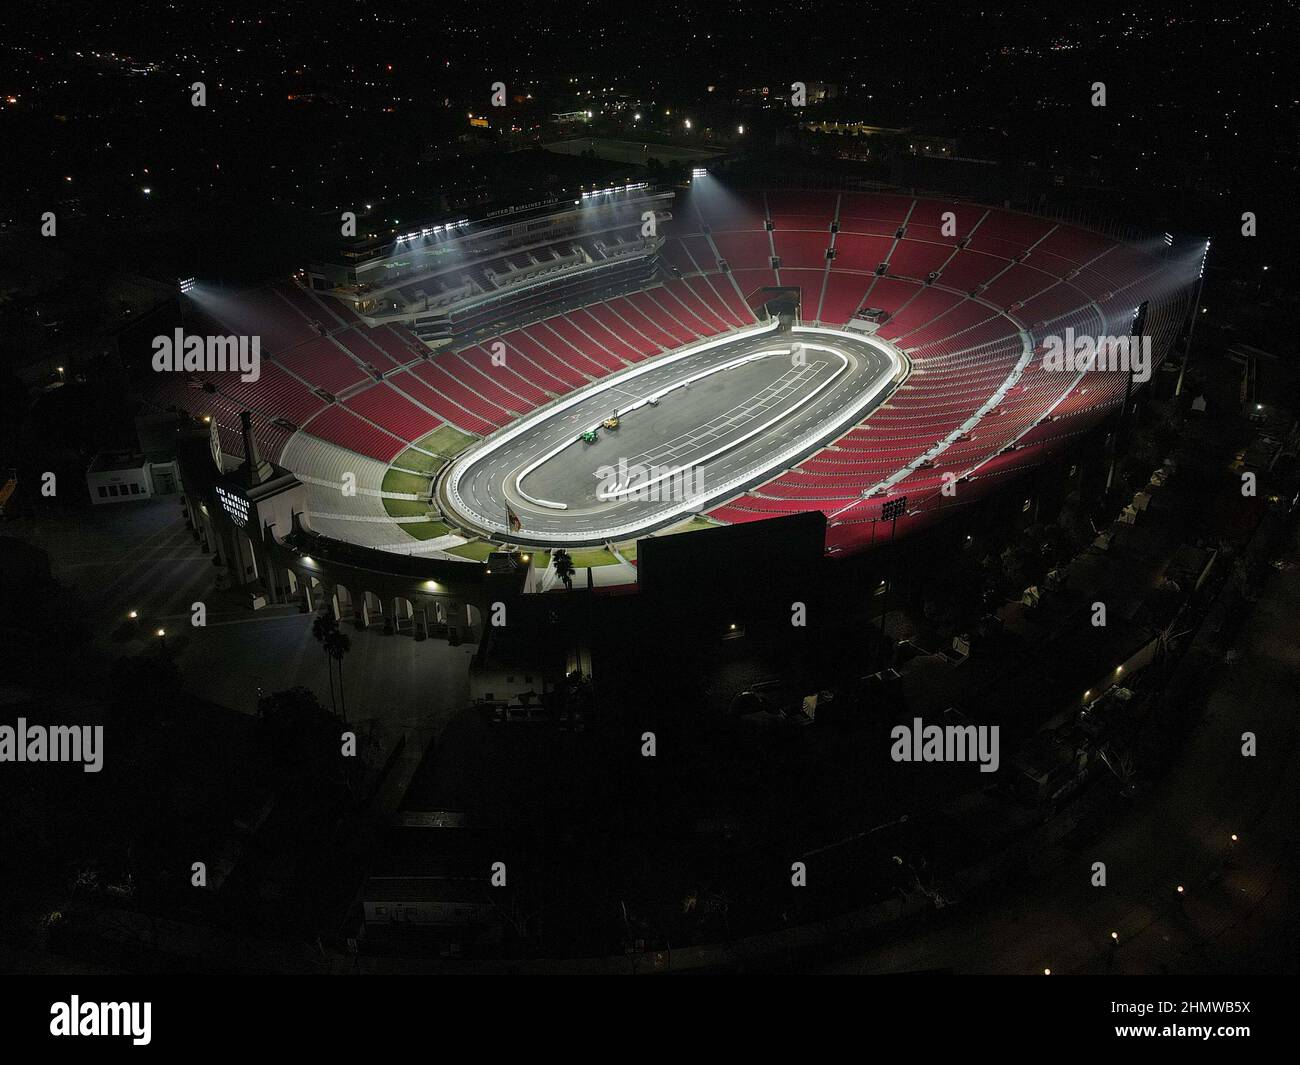 General aerial overall view of construction of a NASCAR track being built at the Los Angeles Memorial Coliseum on Monday, Jan 24, 2022 in Los Angeles. Stock Photo